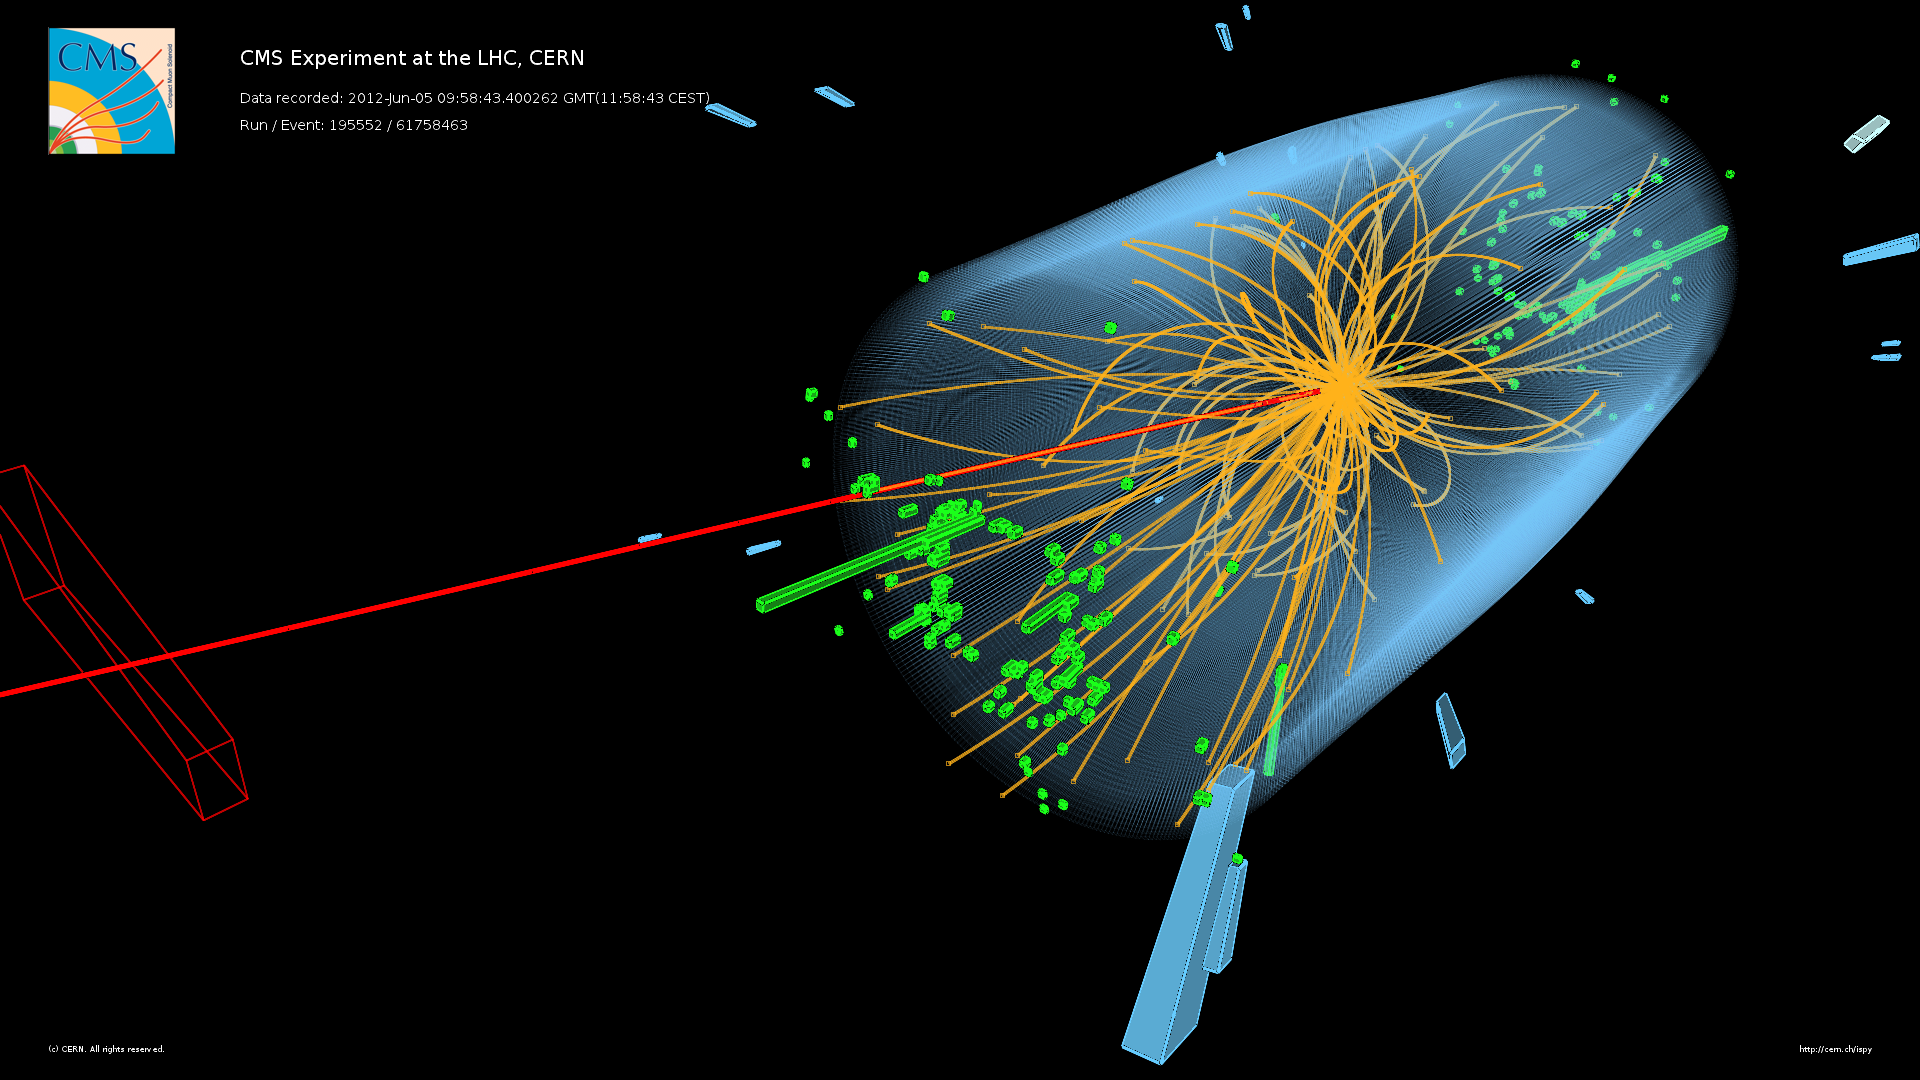 Event recorded by CMS in 2012 at a proton-proton centre-of-mass energy of 8 TeV. It shows characteristics expected from the decay of the SM Higgs boson to a pair of τ leptons. Such an event is characterised by the production of two forward-going particle jets (green towers), seen here in opposite endcaps. One of the τs decays to a muon (red lines) and neutrinos, while the other τ decays into a charged hadron (blue towers) and a neutrino. <a href="https://cds.cern.ch/record/1633370">Download</a>.